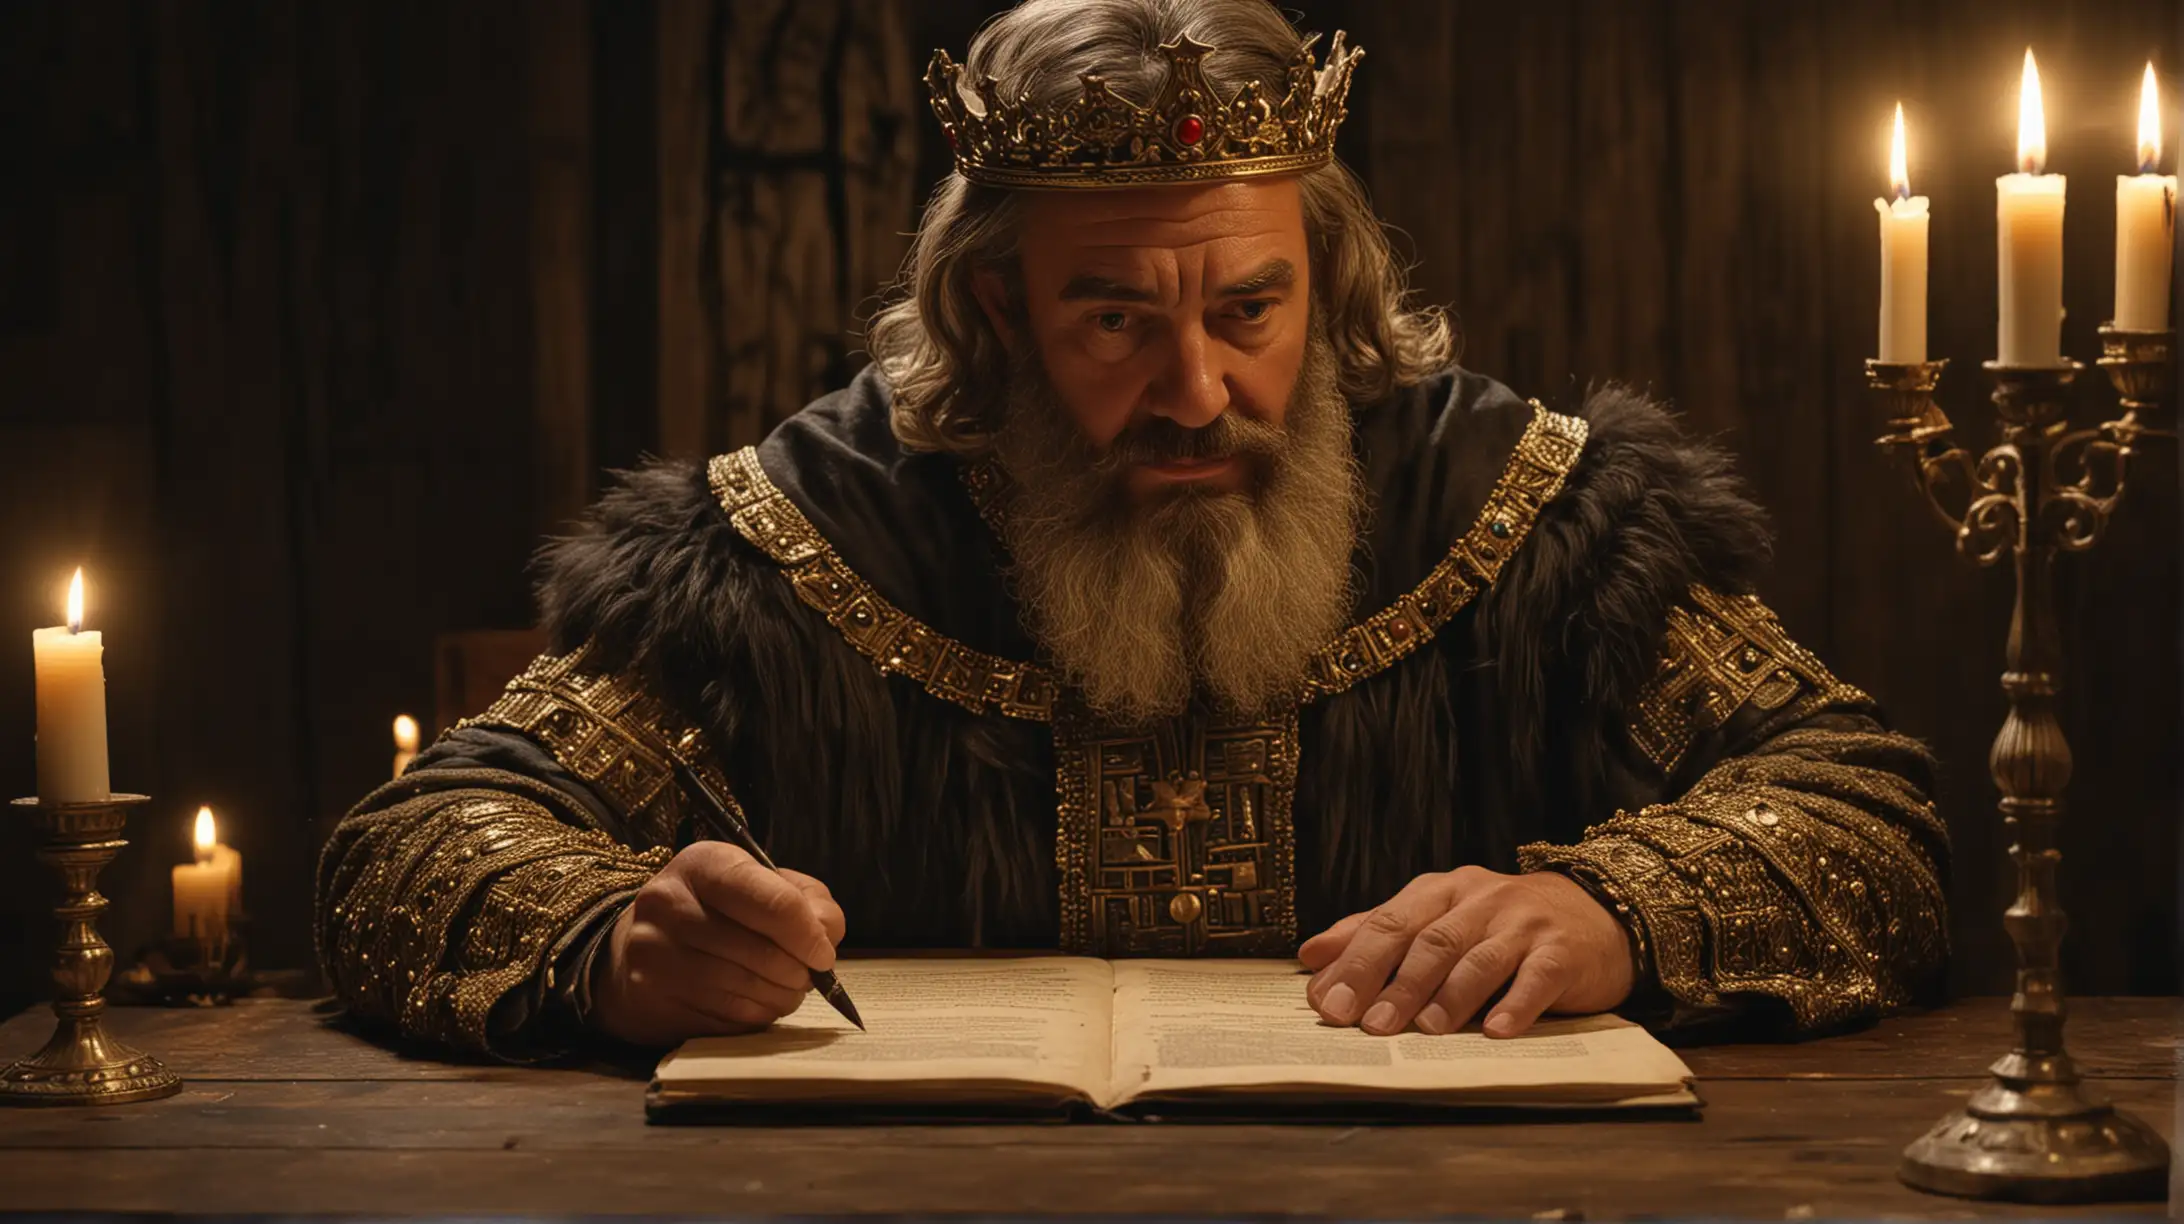 Middle Aged King Artaxerxes Writing Letter by Candlelight